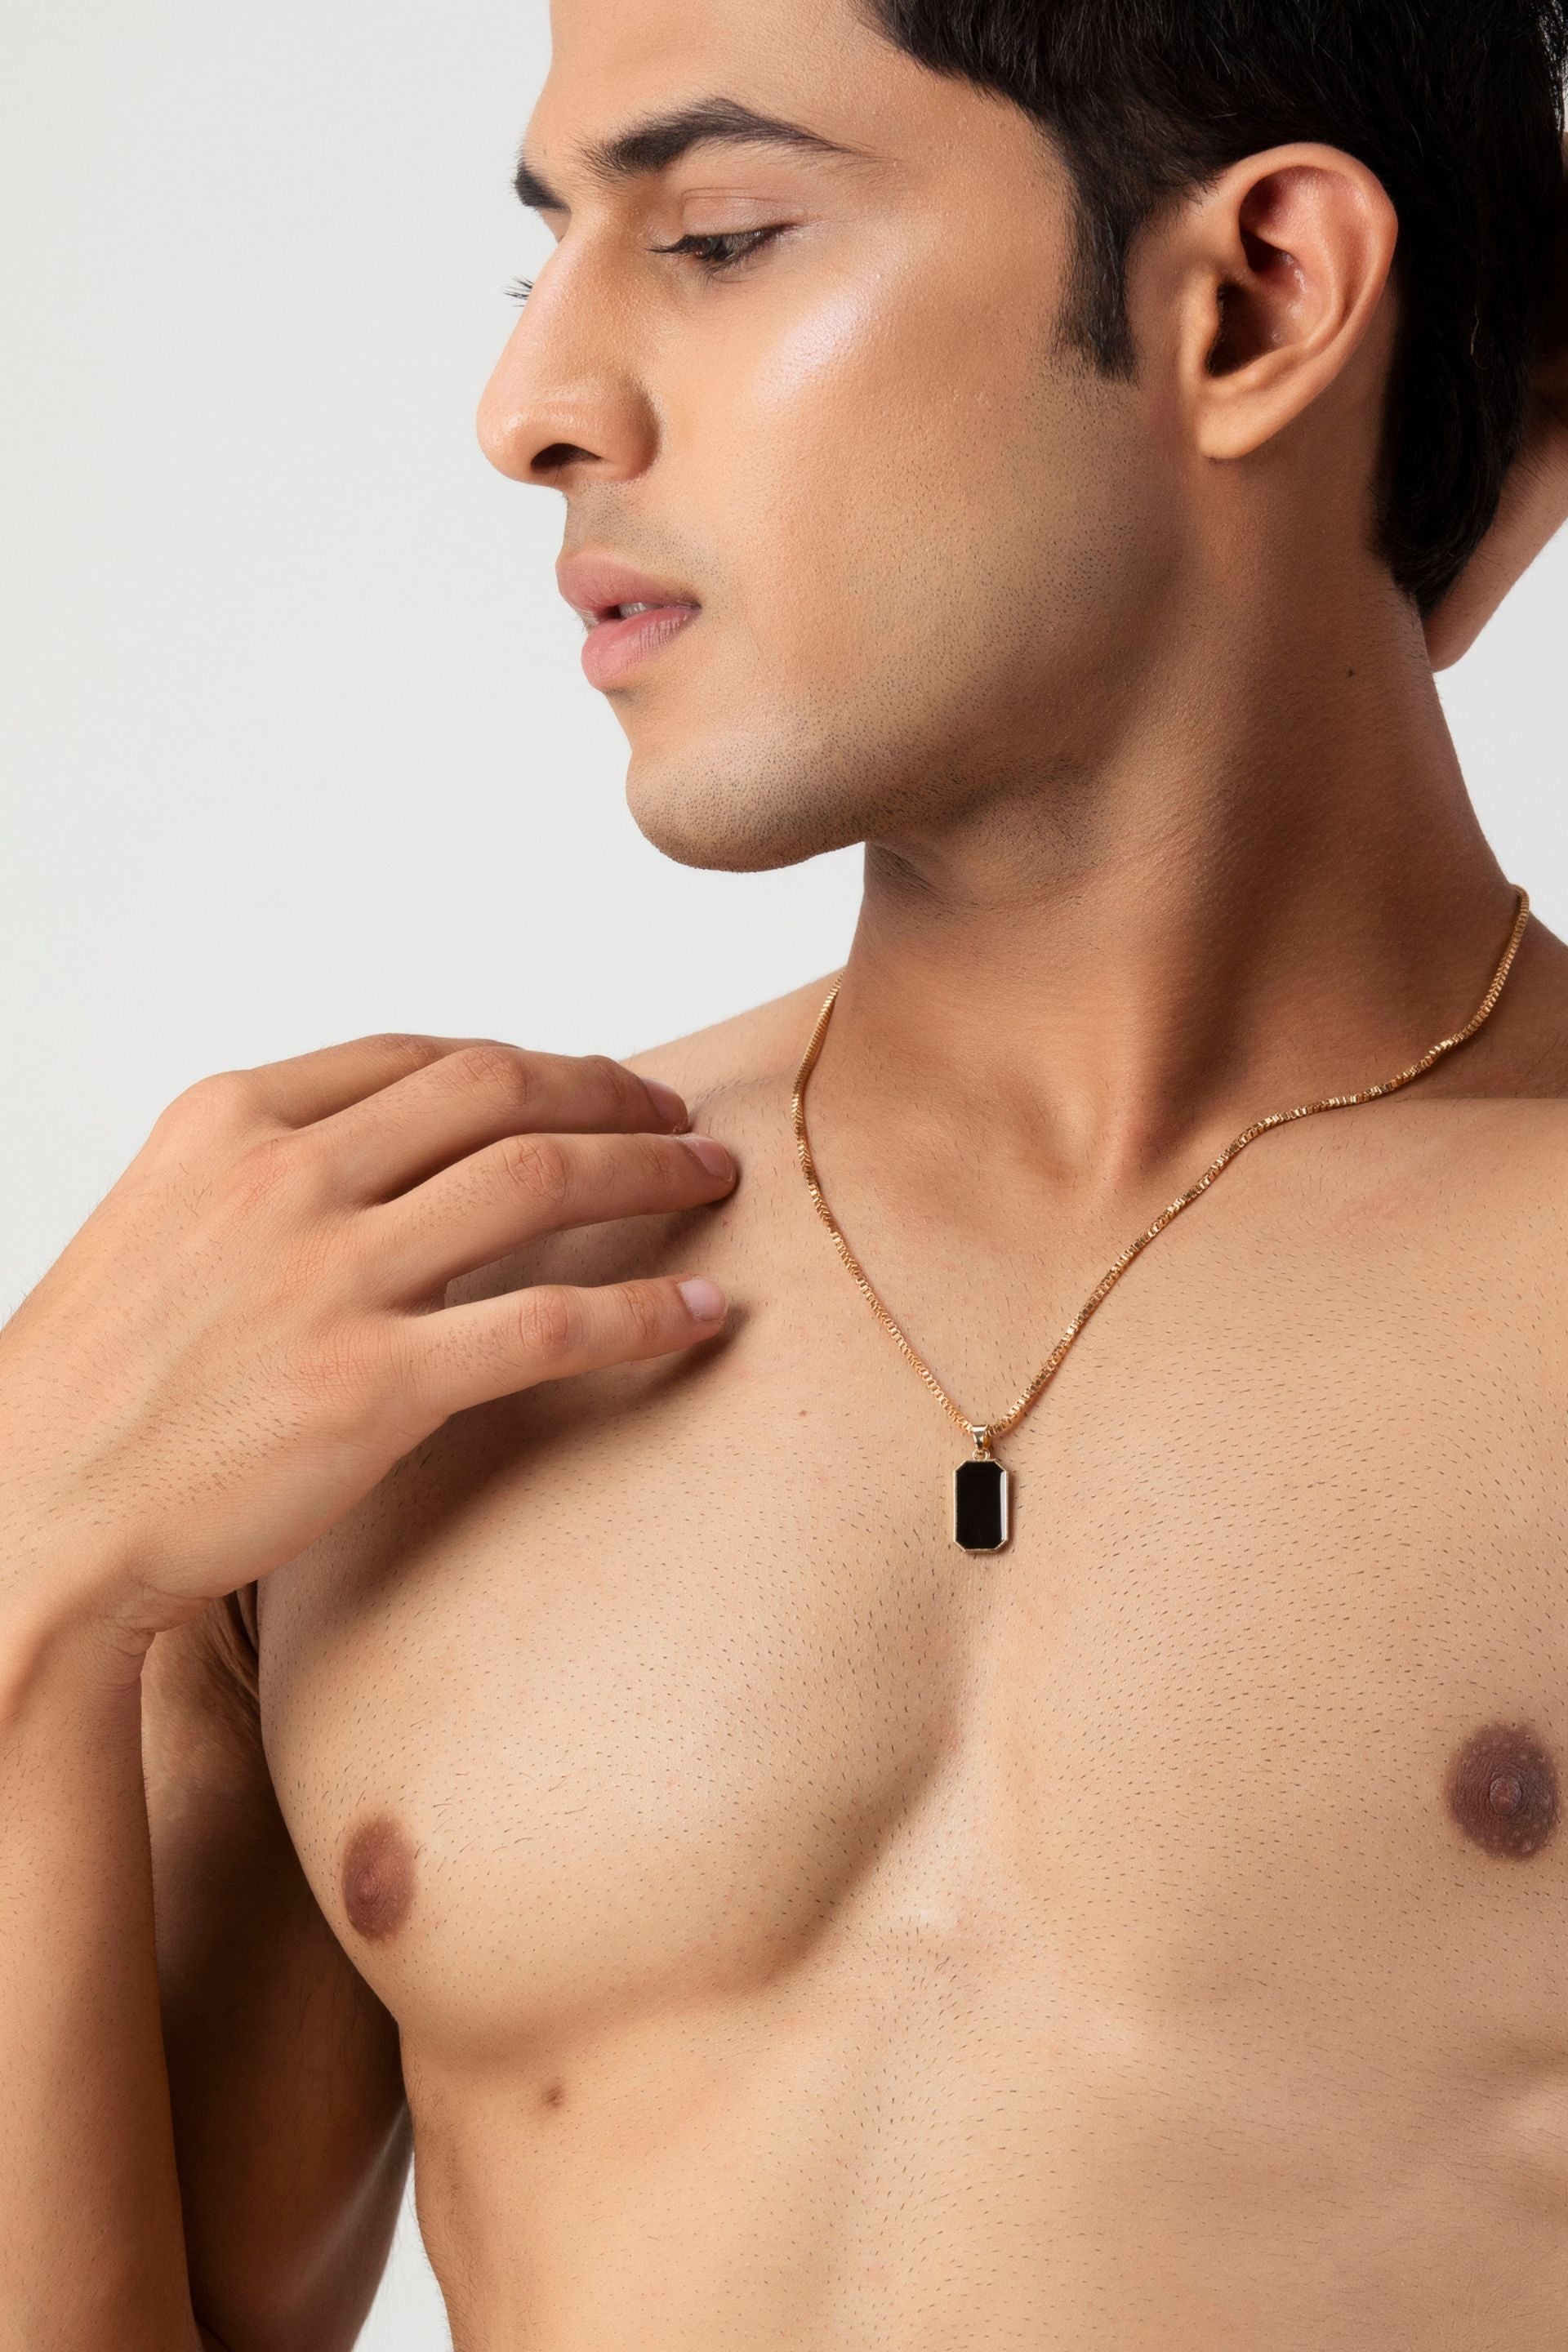 Firangi Yarn Golden Black Simple Pendant with Link Chain Necklace For Him